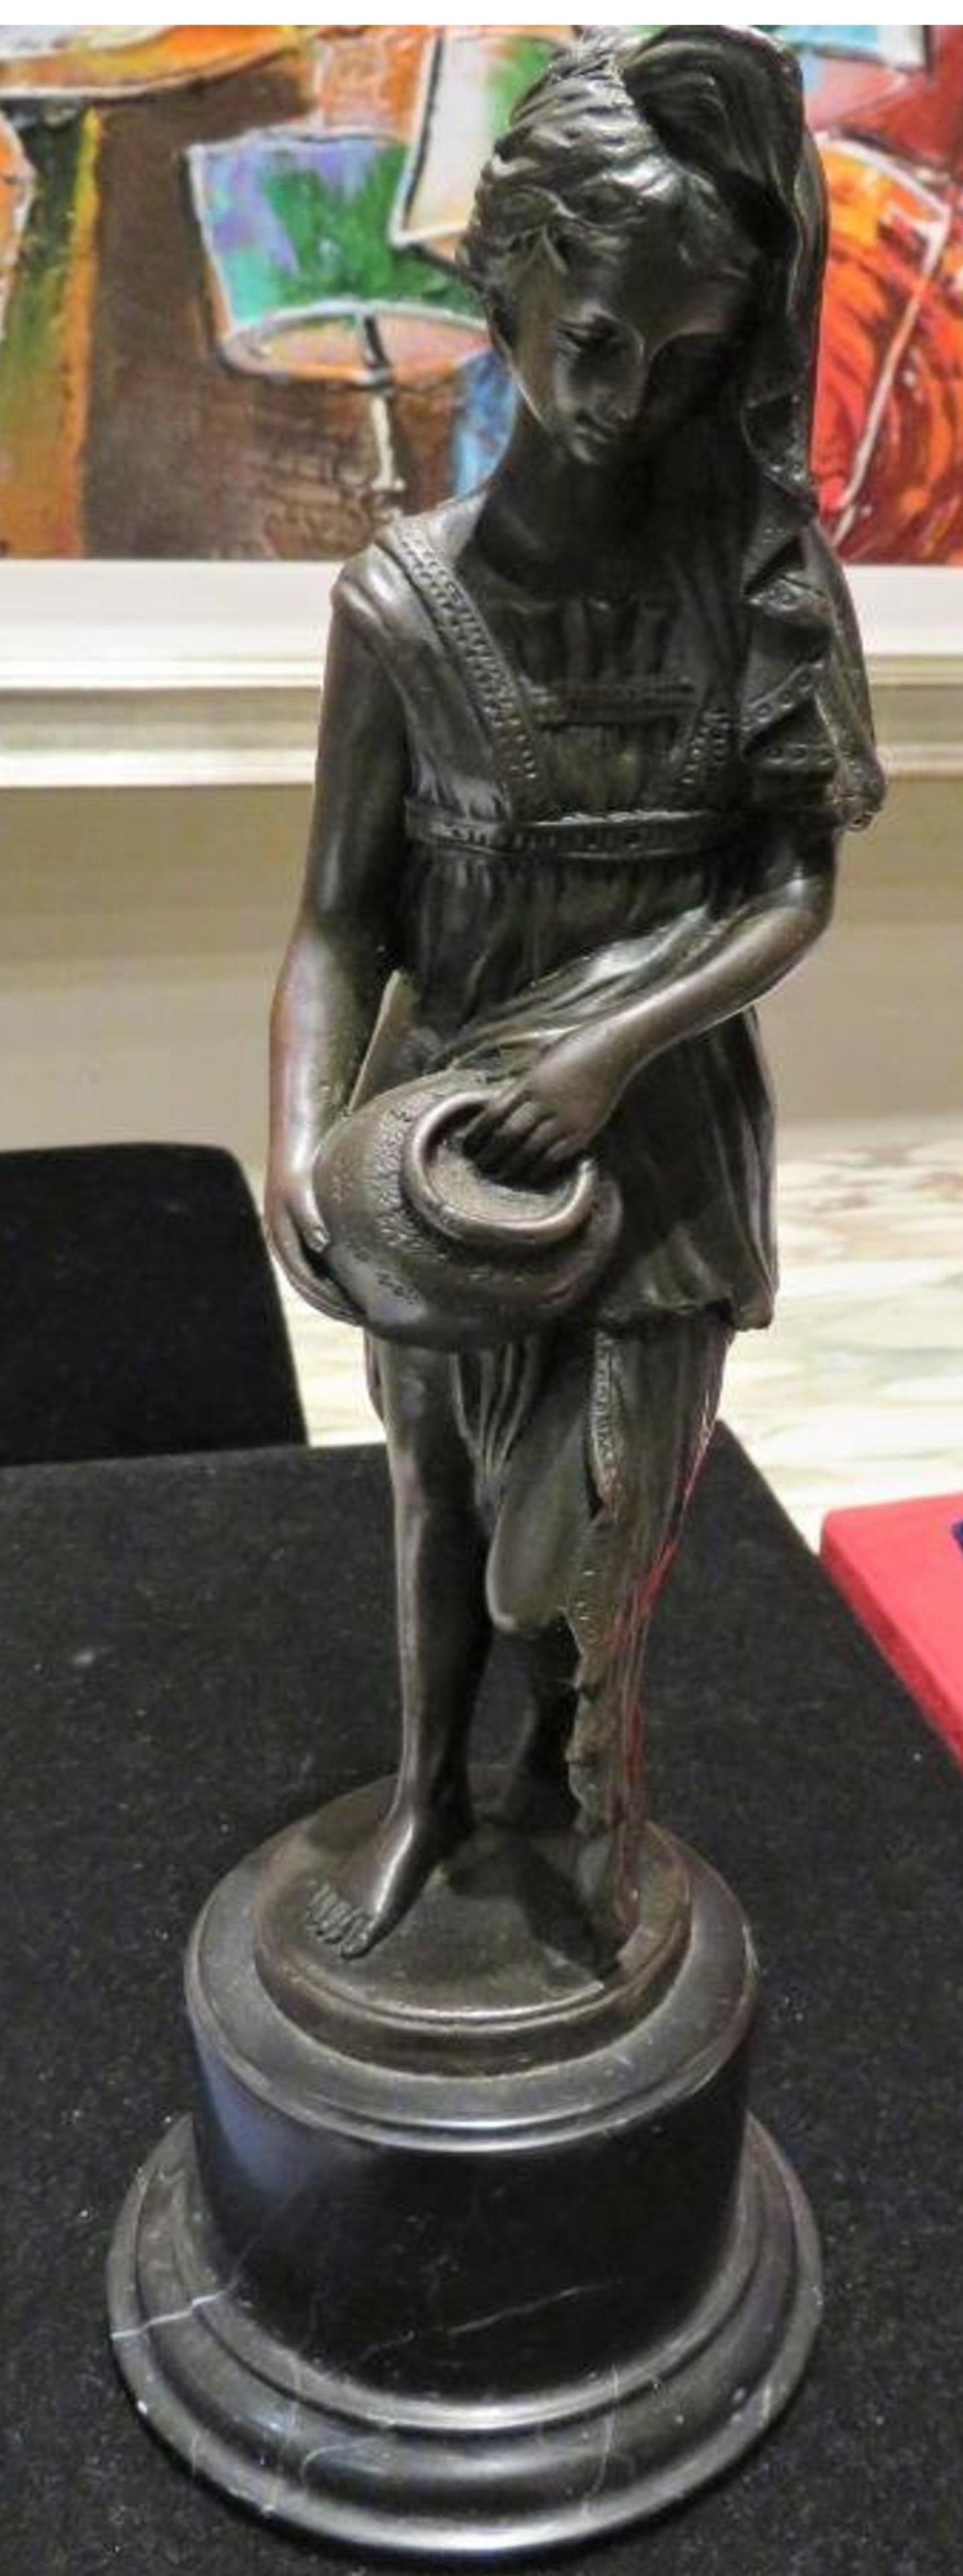 The Following Item is a Magnificent Rare Museum Quality Estate Bronze Sculpture of a Beautifully Draped Woman Holding a Jug. Bronze is Finely Done with Outstanding Detail and Fine Patina, standing atop a Black Marble Base. Possibly Inscribed Milo.